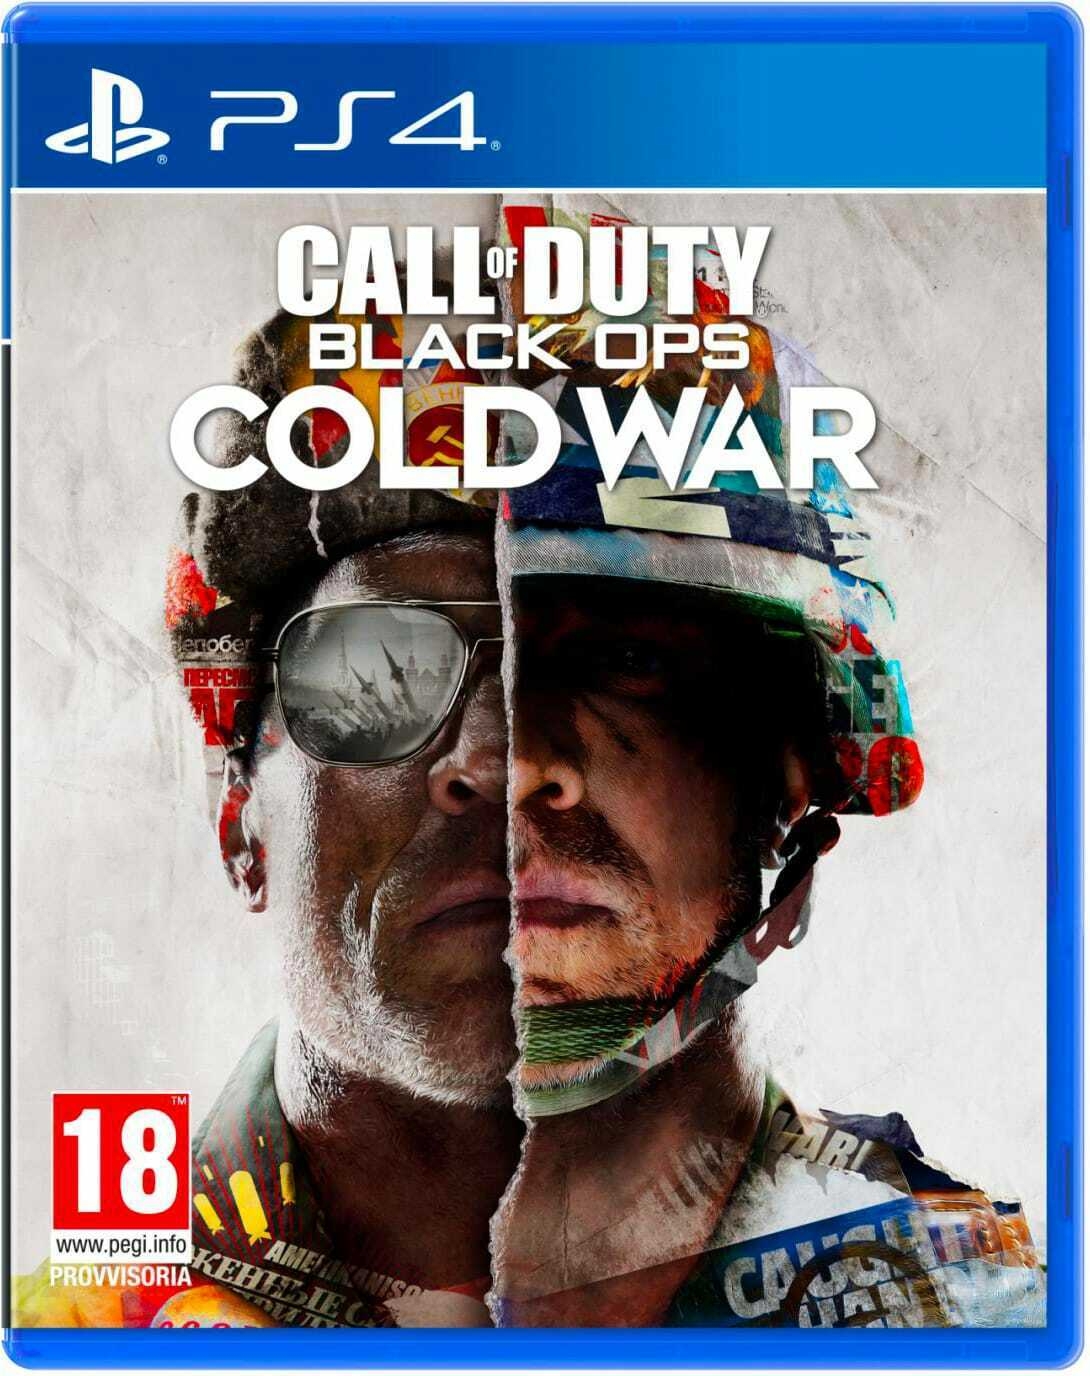 Ps4 Call Of Duty: Black Ops Cold War Ufficiale Italia